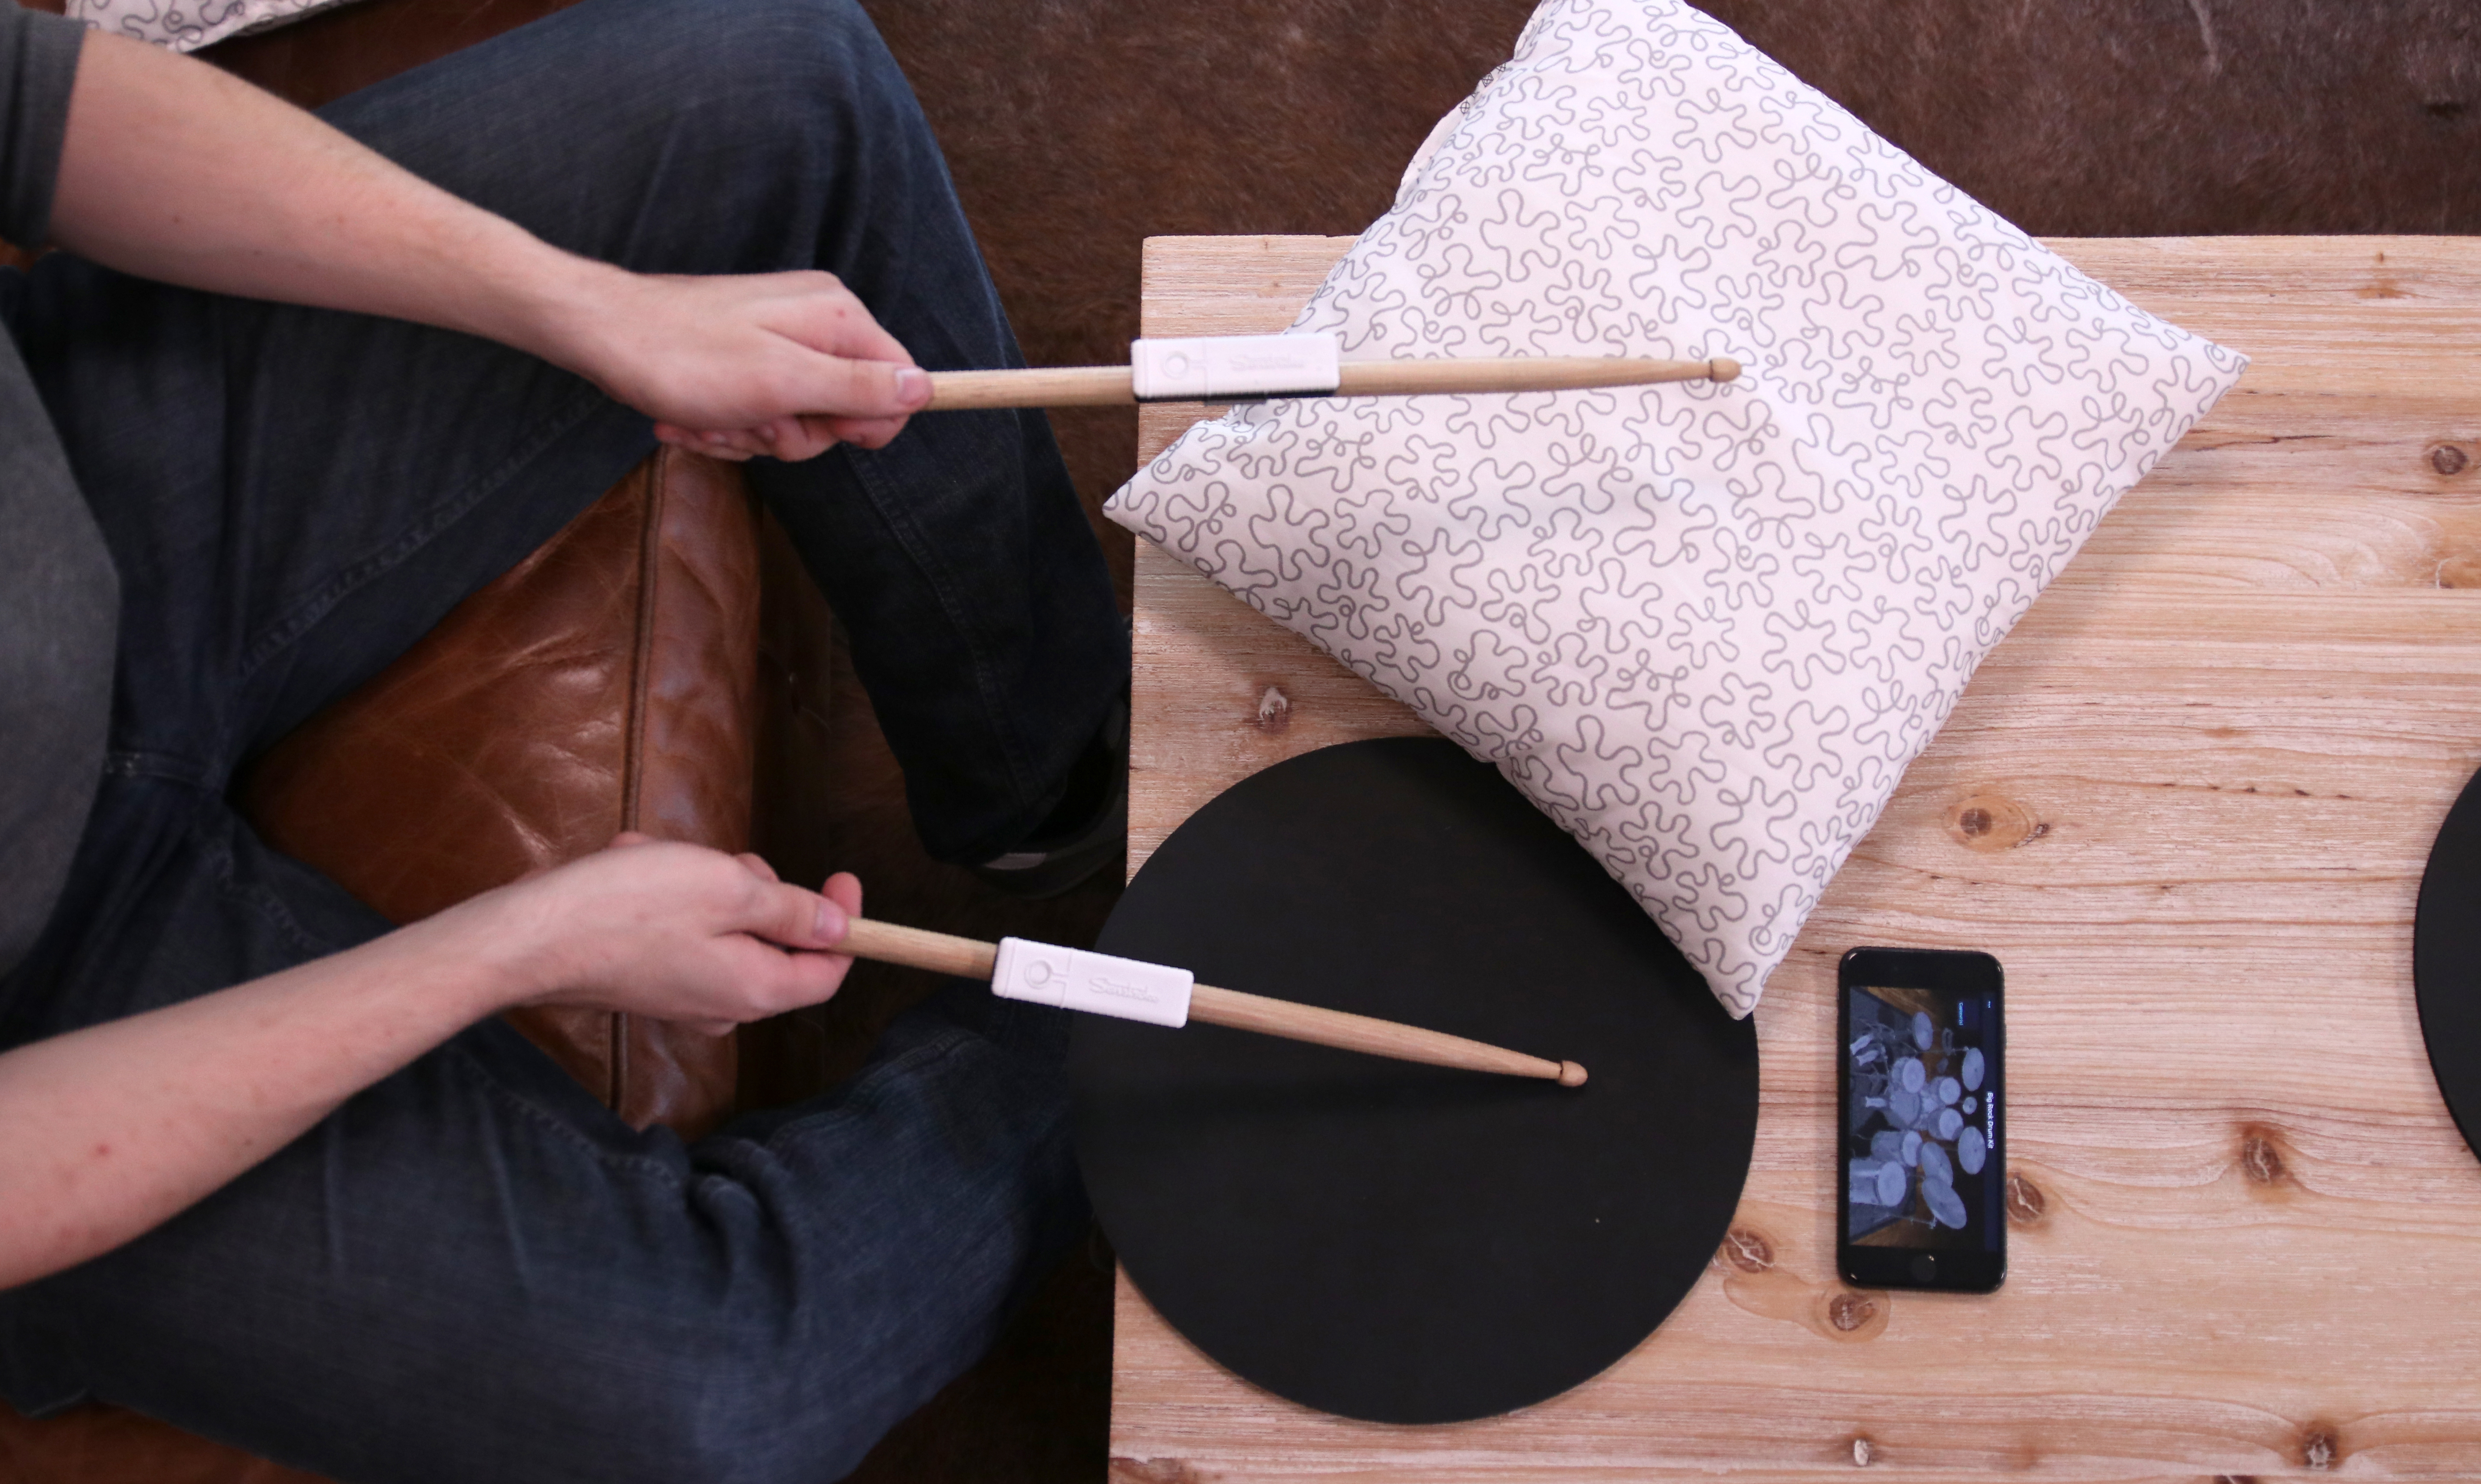 senstroke on table with cushion drumming pad and smartphone app